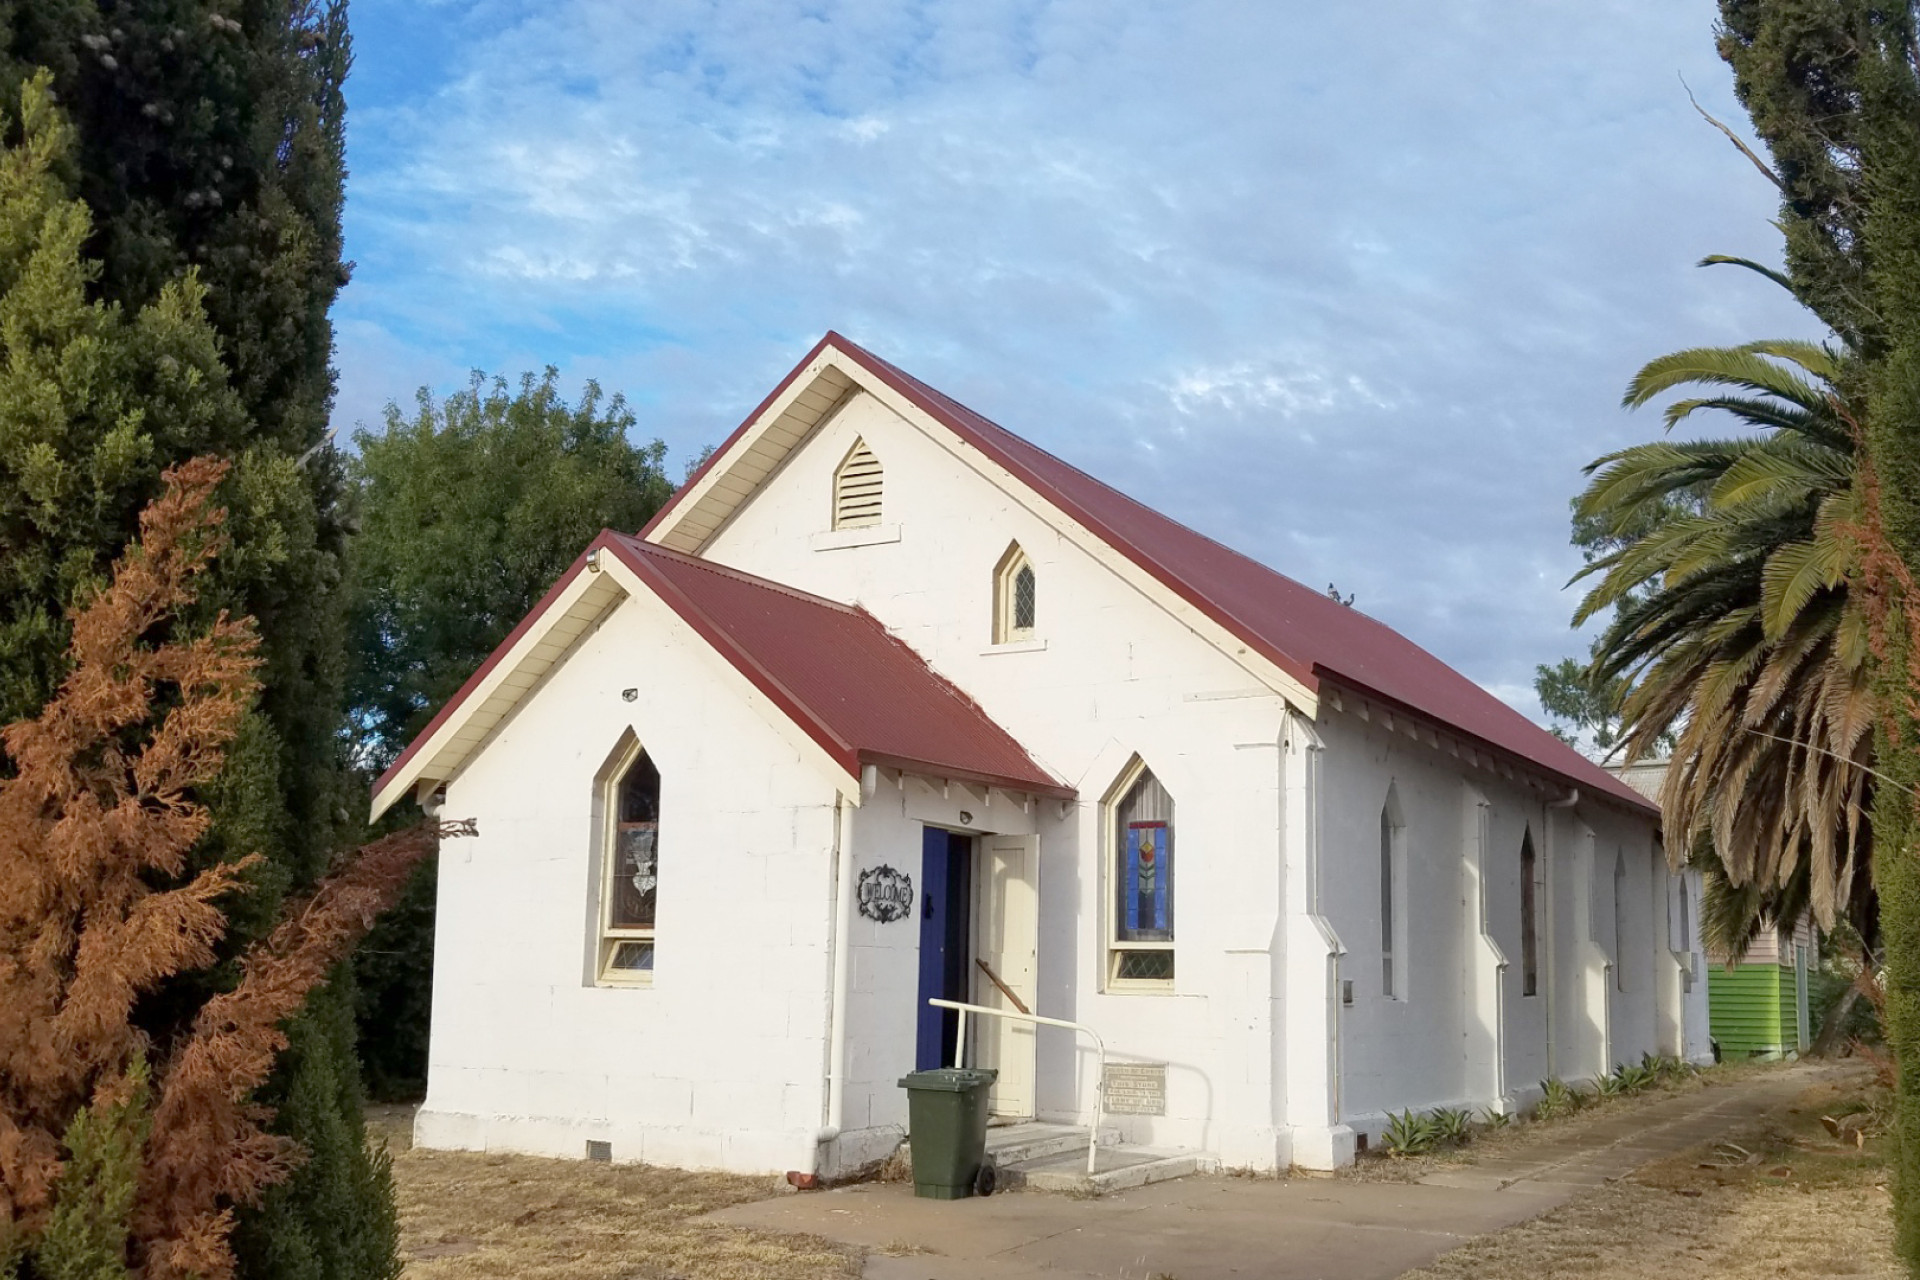 Warracknabeal's former Church of Christ building, on the corner of Jamouneau and Milbourne Streets, now a holiday home for a Melbourne couple.